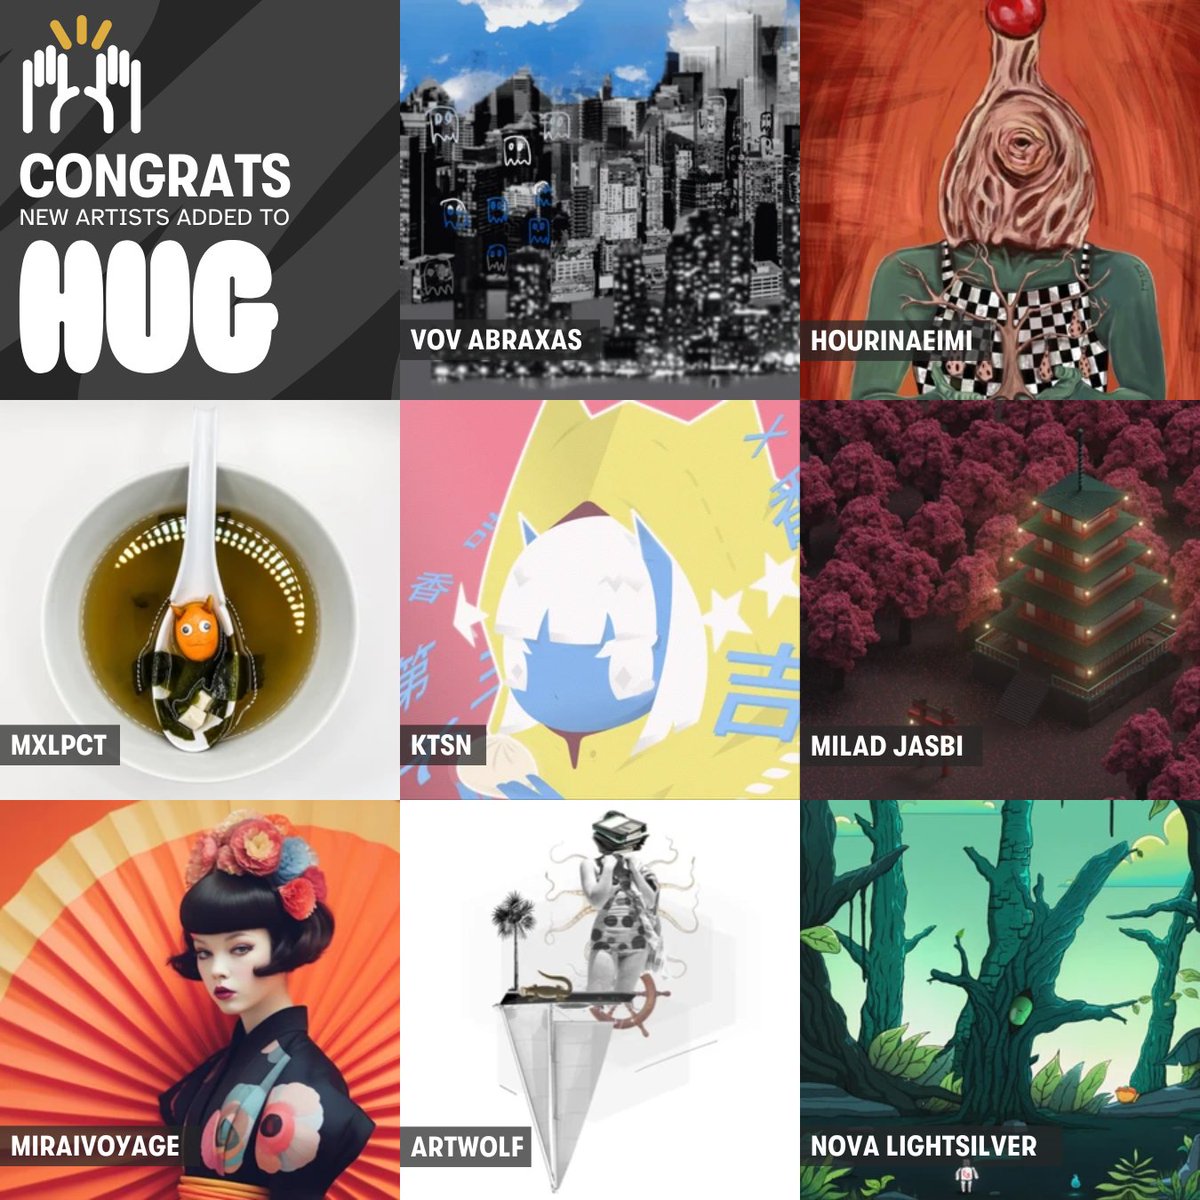 Congratulations to the latest artists curated by our community and added to HUG 🎊

@novachrome_x377
@veeeecoleman
@miraivoyage
@madebymiim
@ktsn_nn
@mxlpct
@hourinaeimi
@vovabraxas

Welcome! We can't wait to see how you customize your profiles 🤗✨